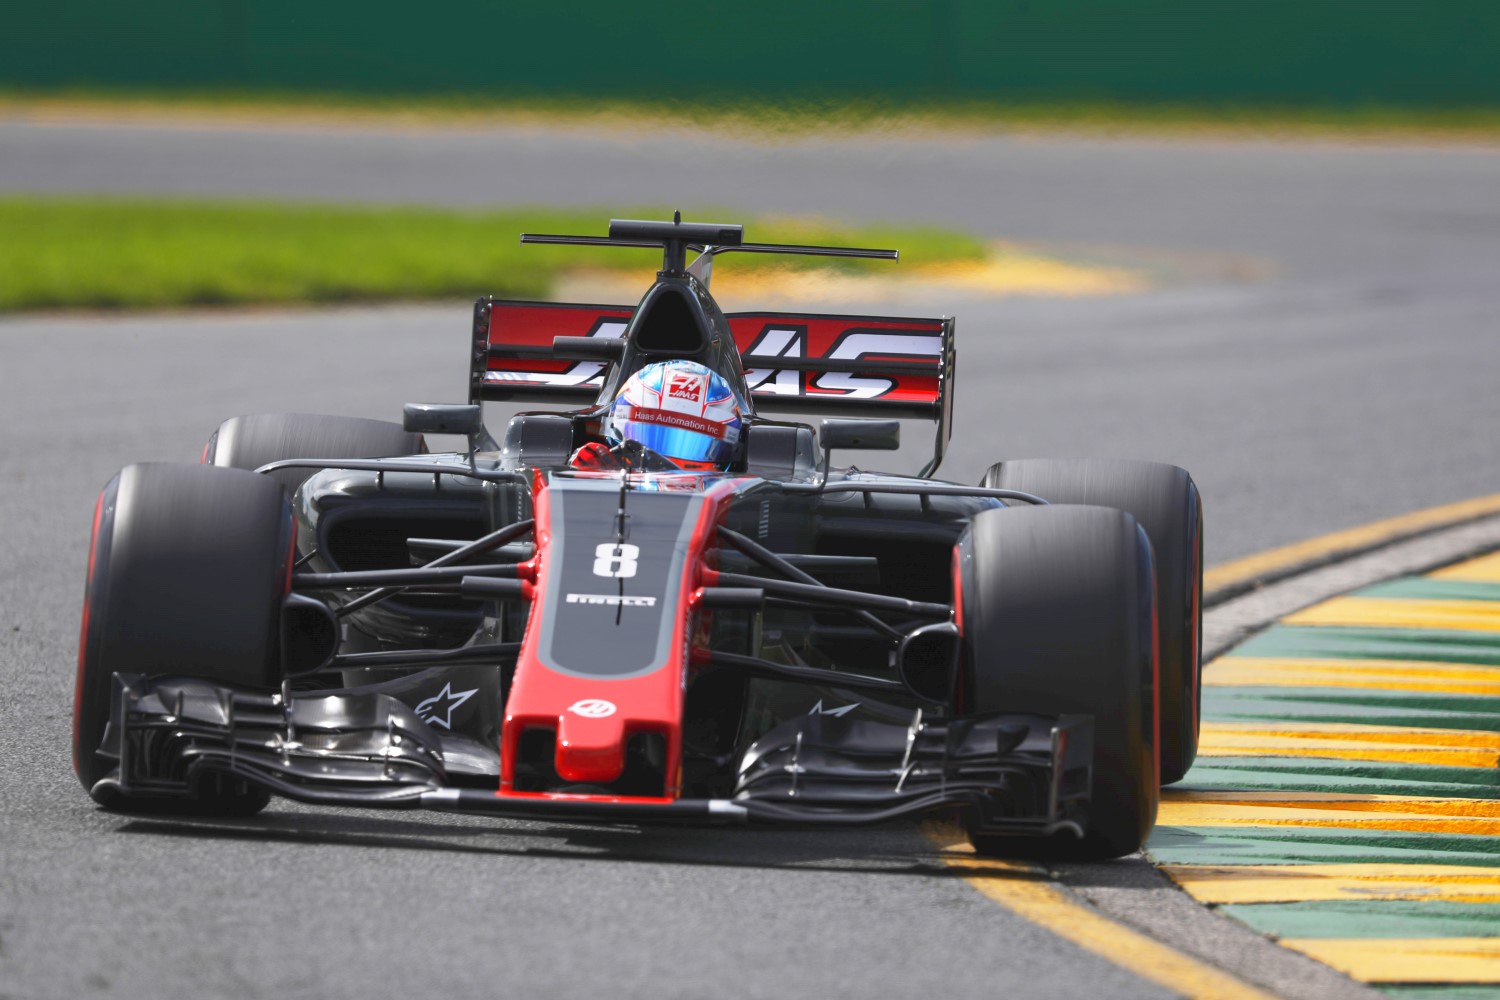 The Haas cars get Maserati backing